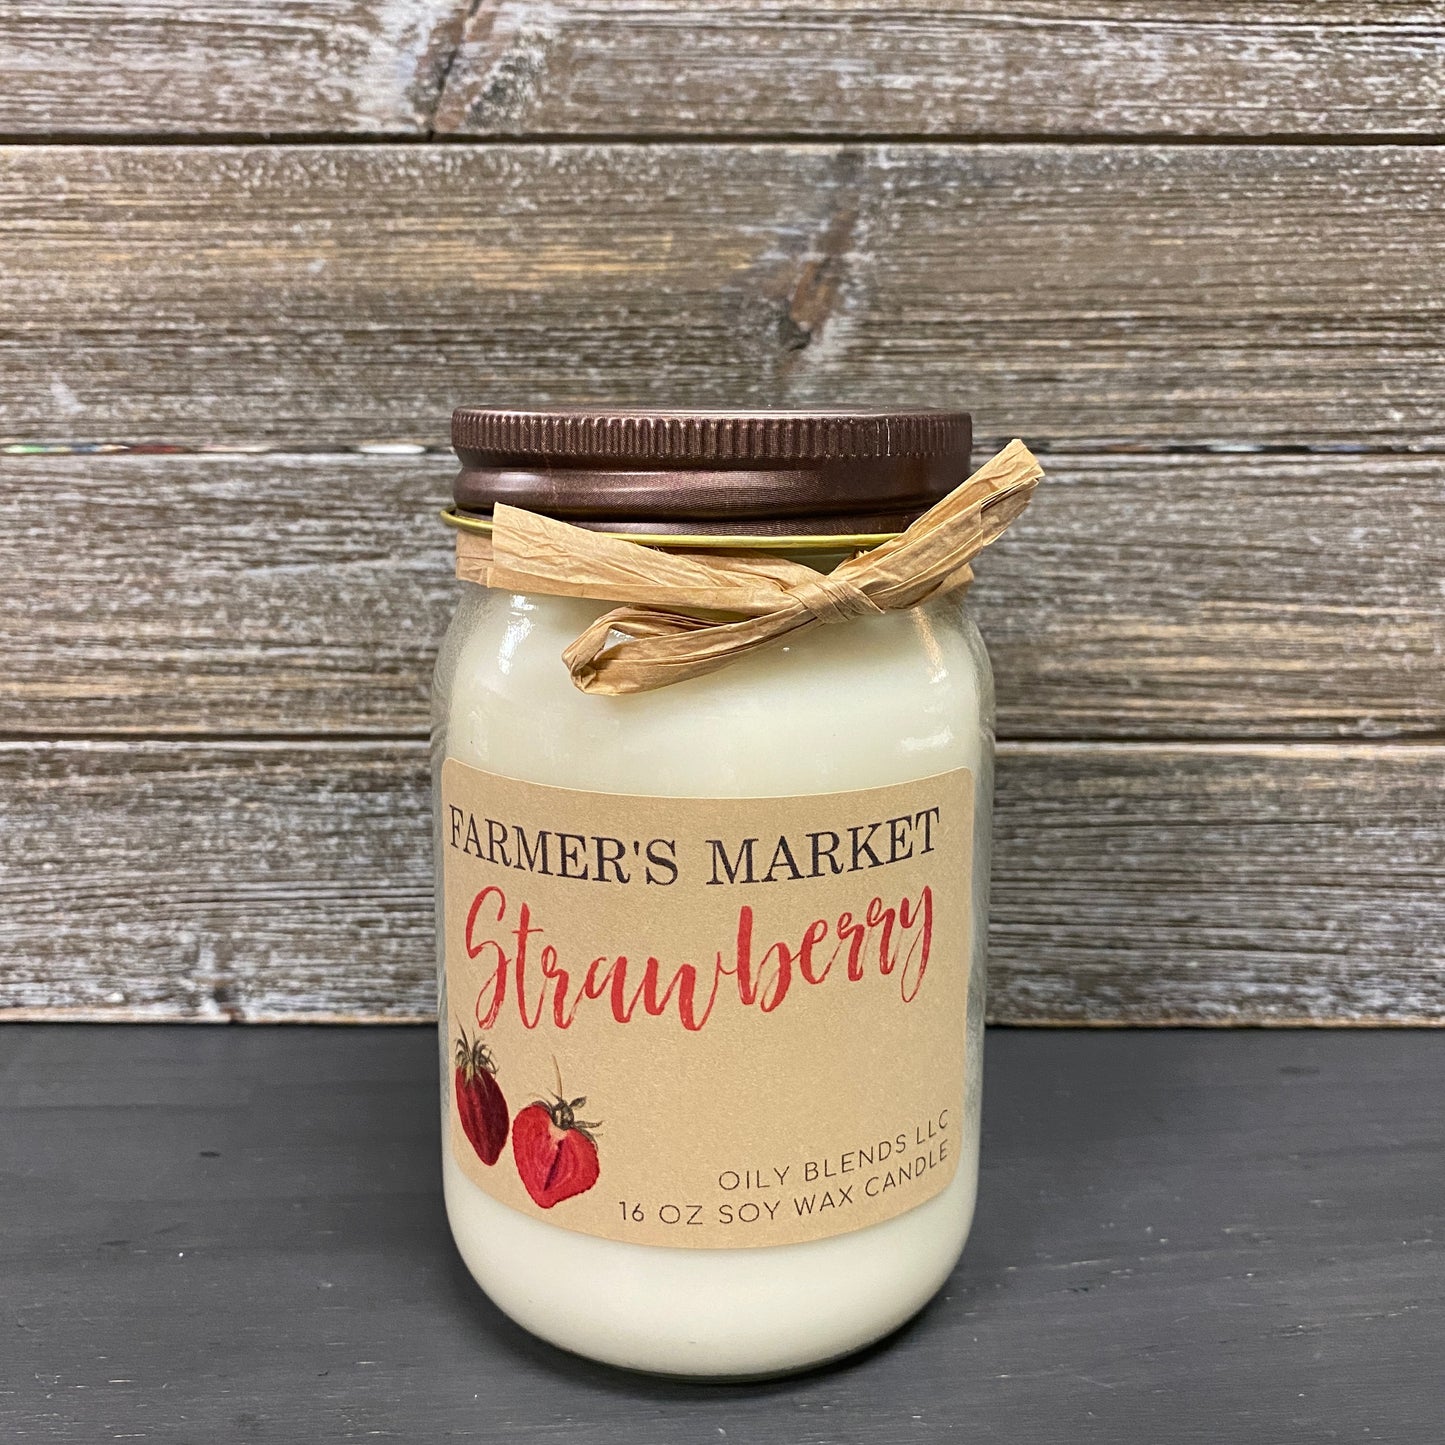 Farmer's Market Collection - Candles & Wax Melts